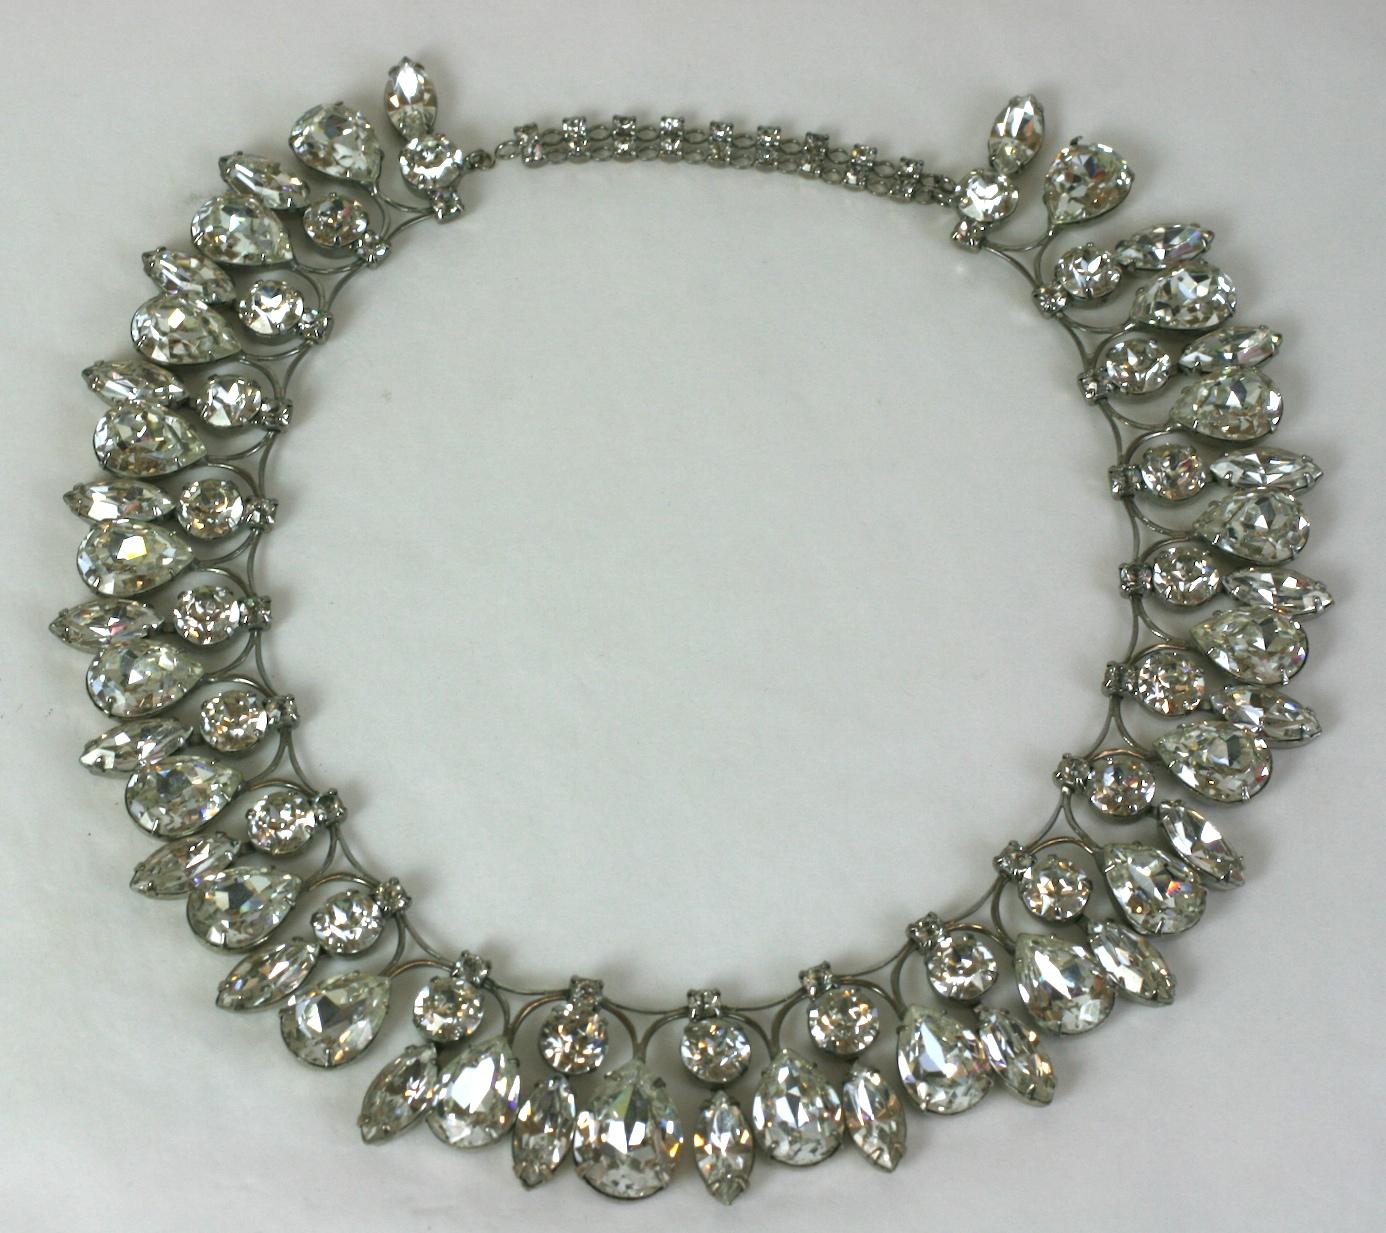 Glamorous Pear Shaped Rhinestone Suite from the 1950's. High quality manufacture with the knife edge settings which let the stones shine. The navette stones are set so they tremble with wearer on necklace and bracelet. 
1950's USA, likely made by